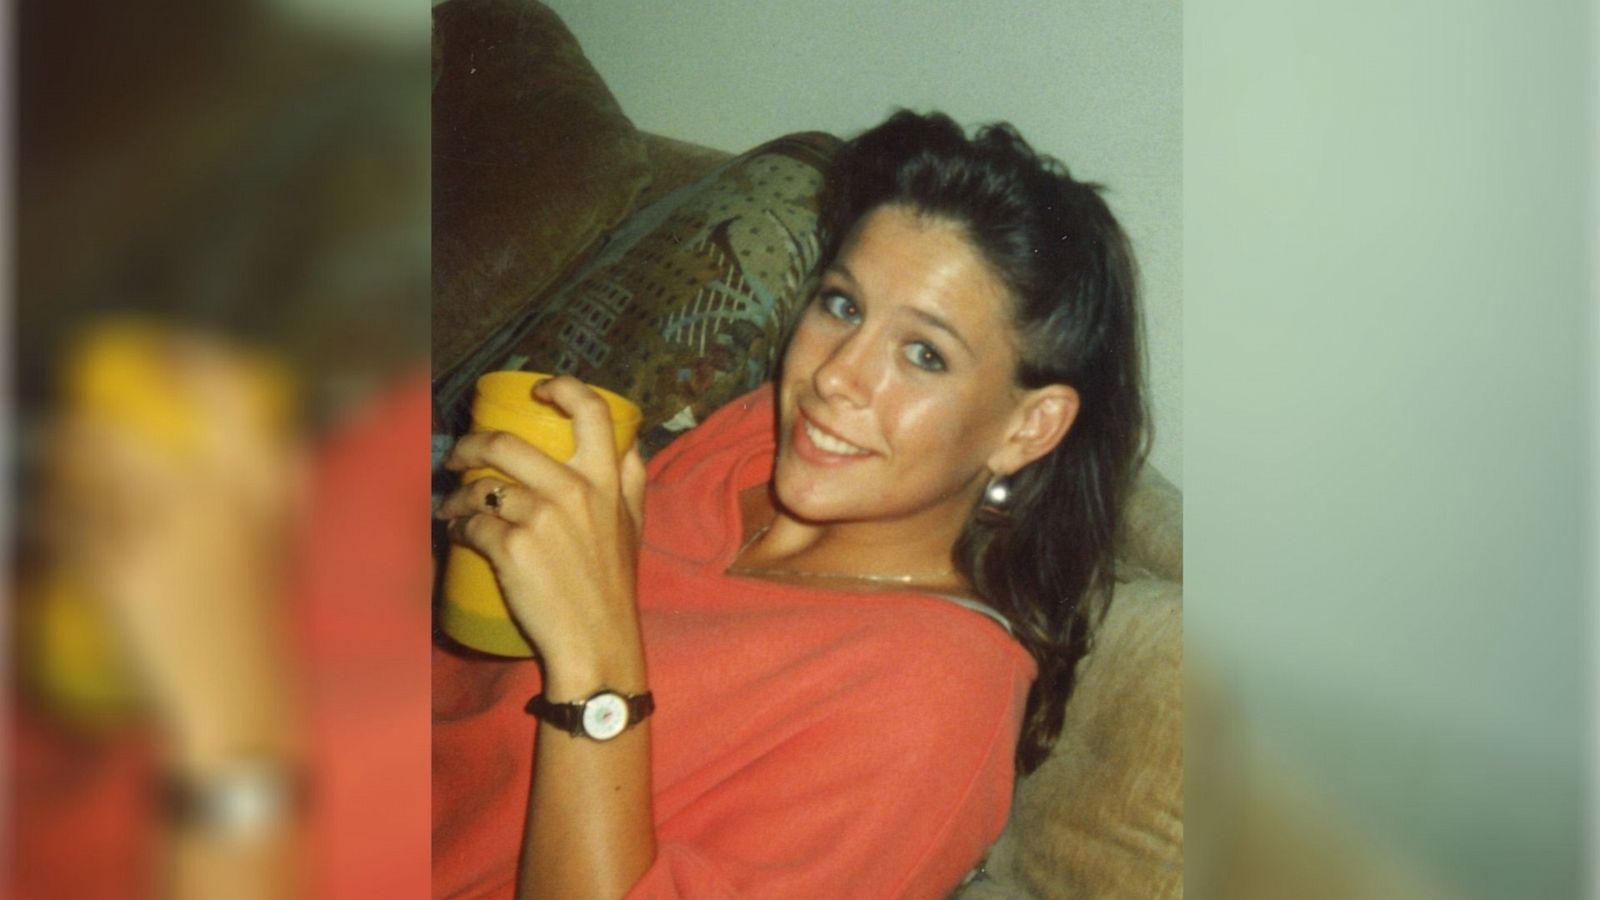 Investigation and conviction in 1996 murder raises questions